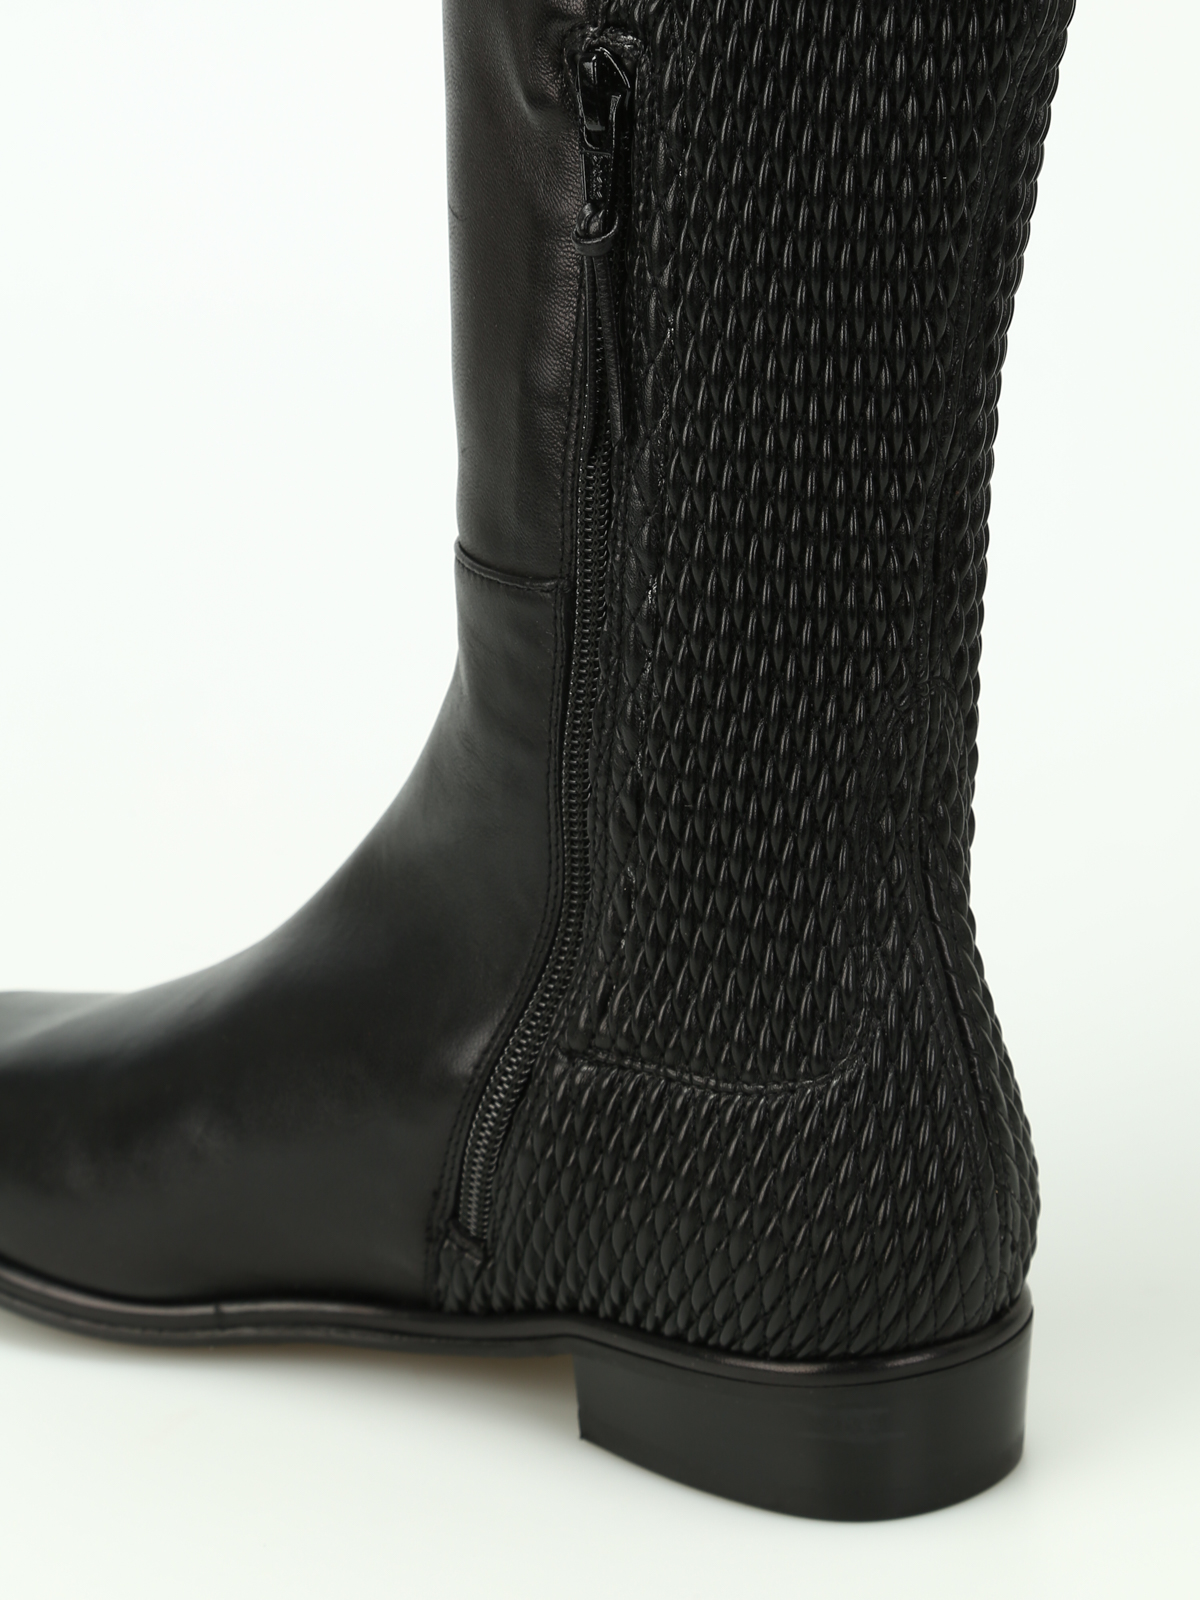 Buy > stretch back boots > in stock